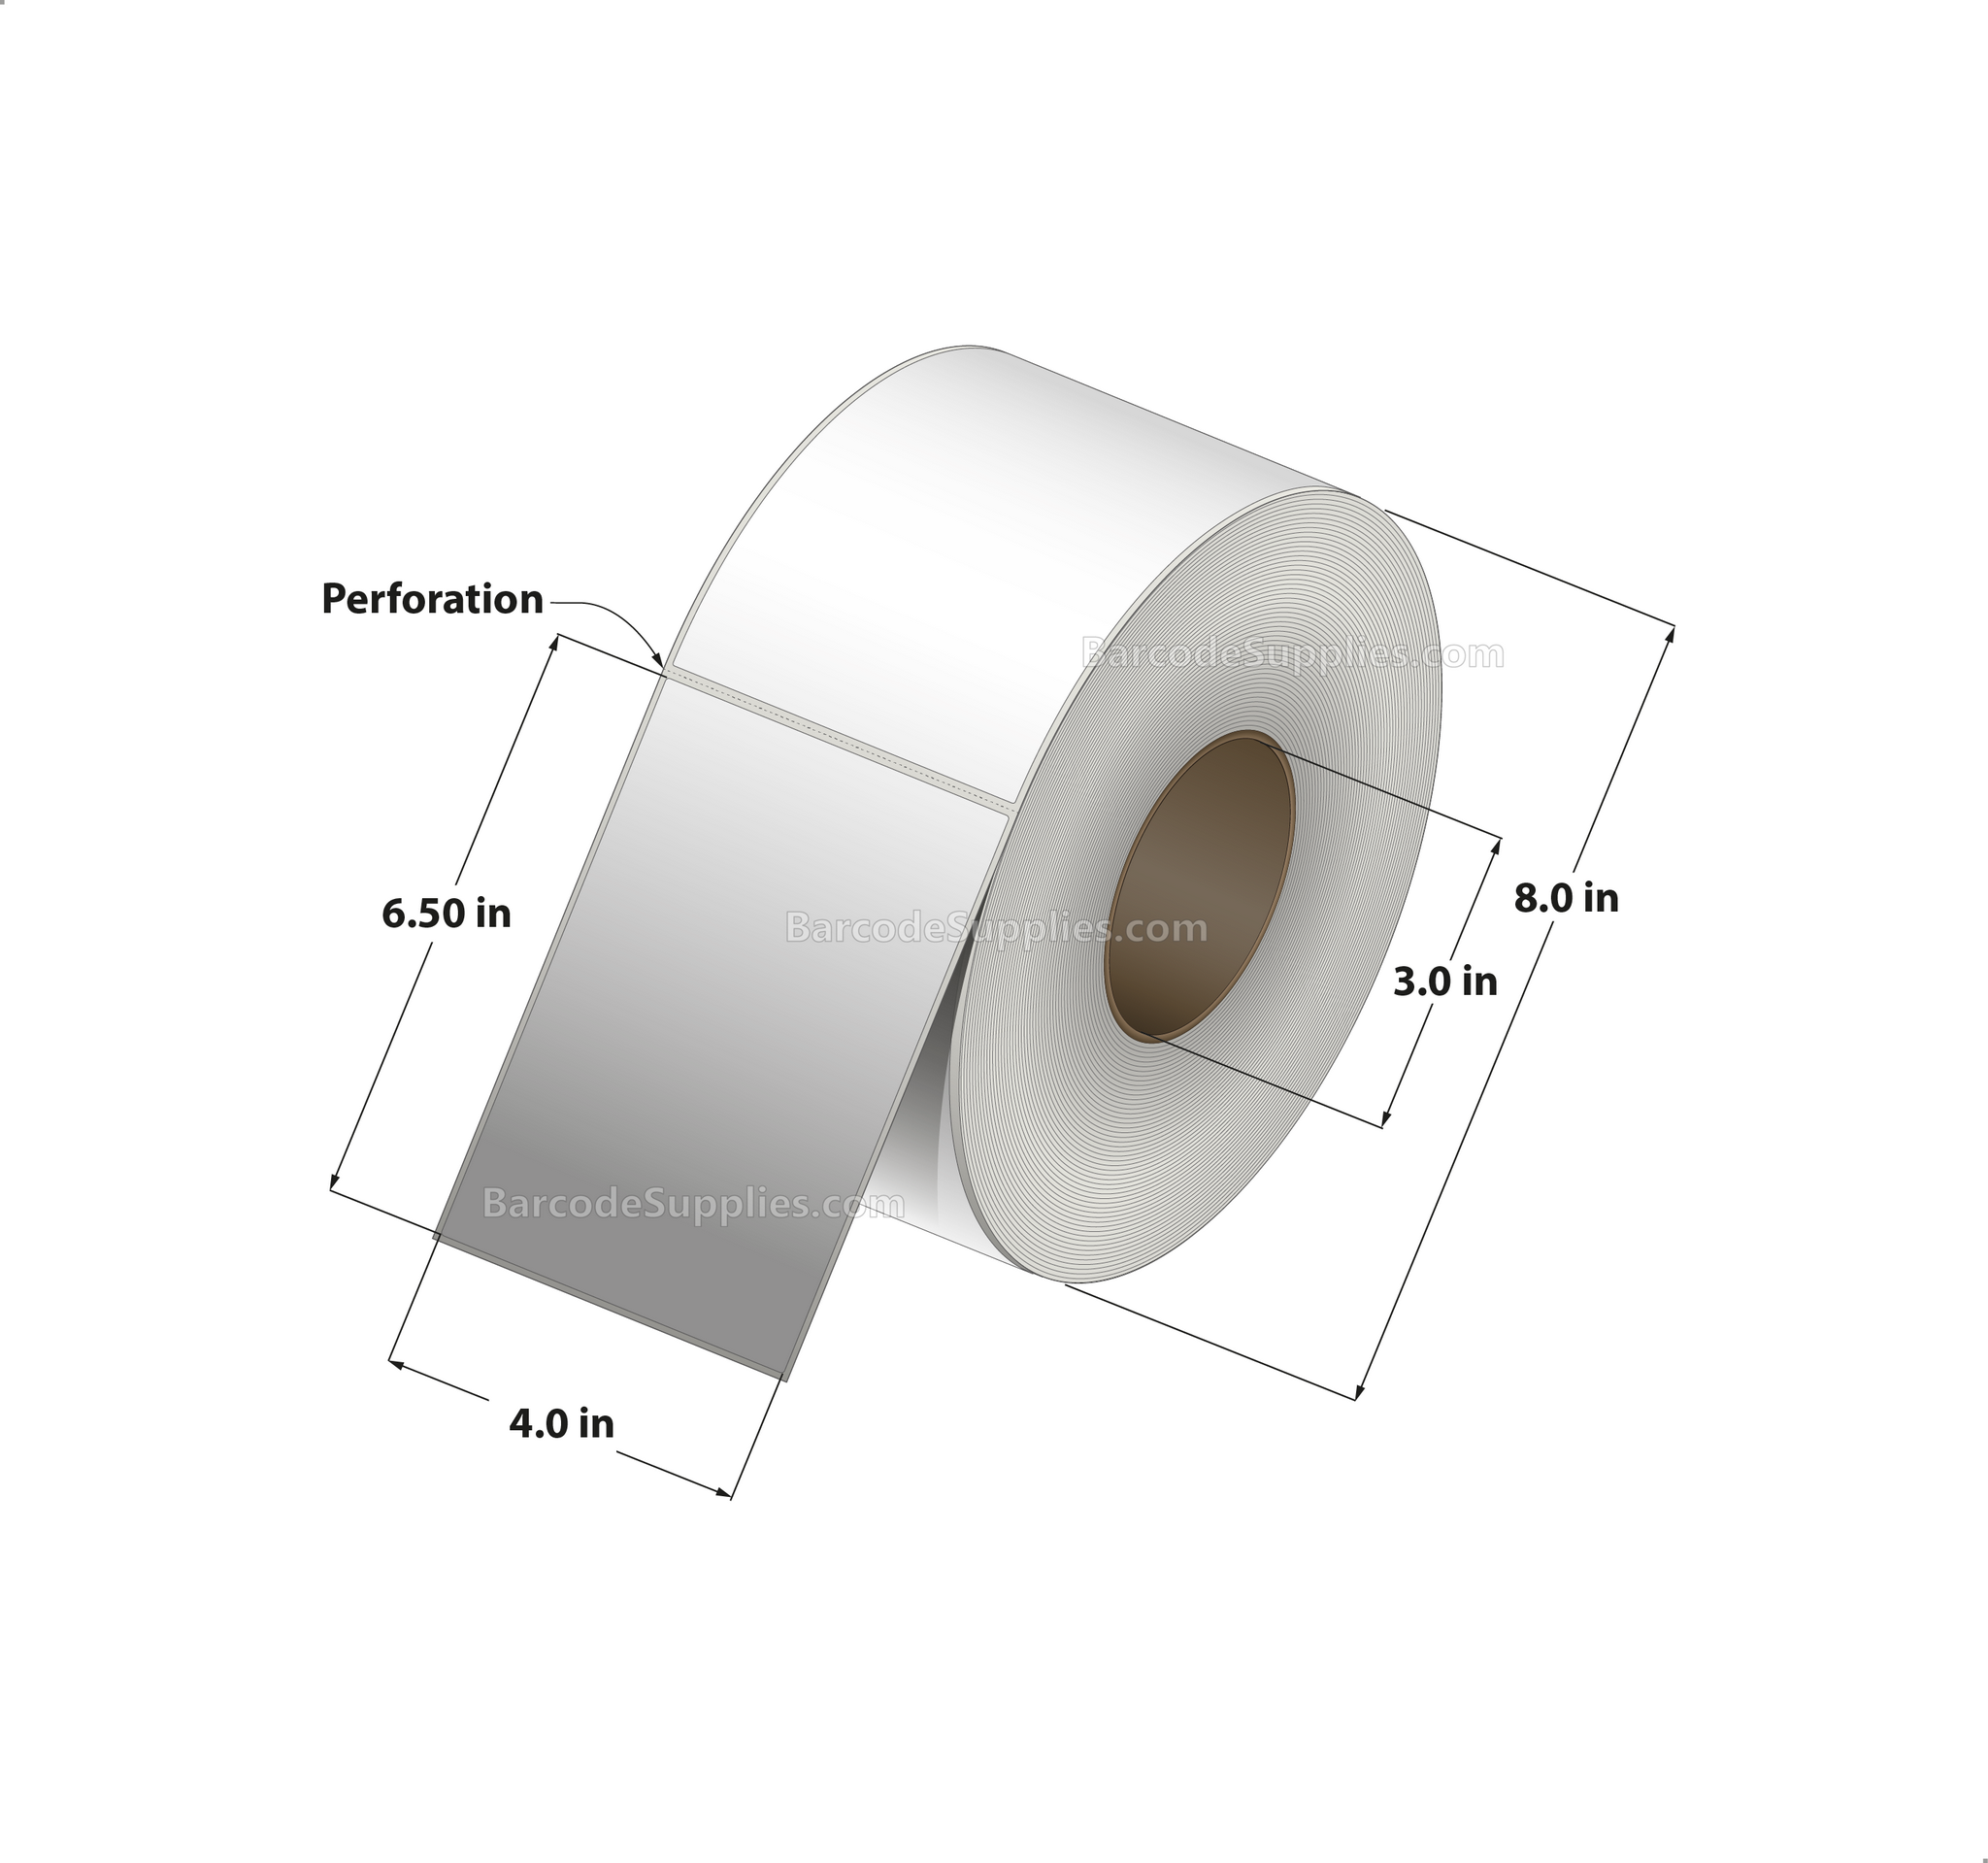 4 x 6.5 Thermal Transfer White Labels With Permanent Adhesive - Perforated - 900 Labels Per Roll - Carton Of 4 Rolls - 3600 Labels Total - MPN: RT-4-65-900-3